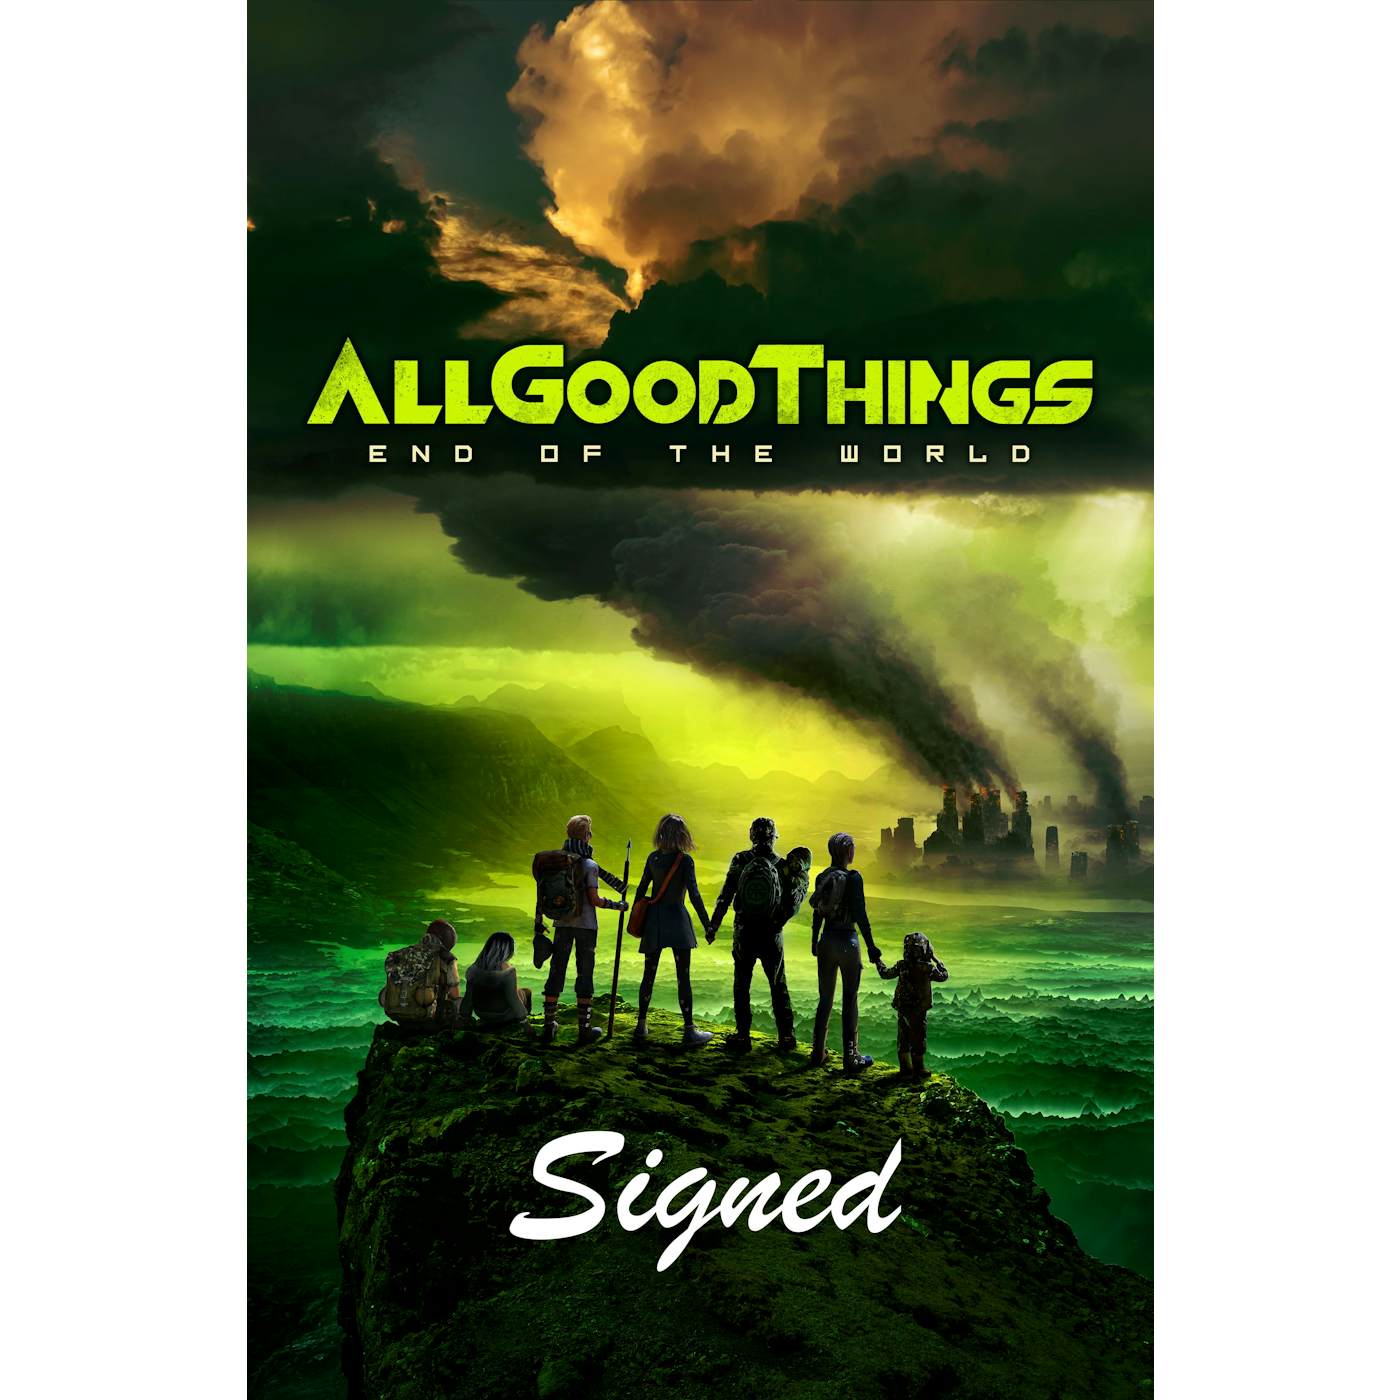 ALL GOOD THINGS - "END OF THE WORLD" POSTER **SIGNED**